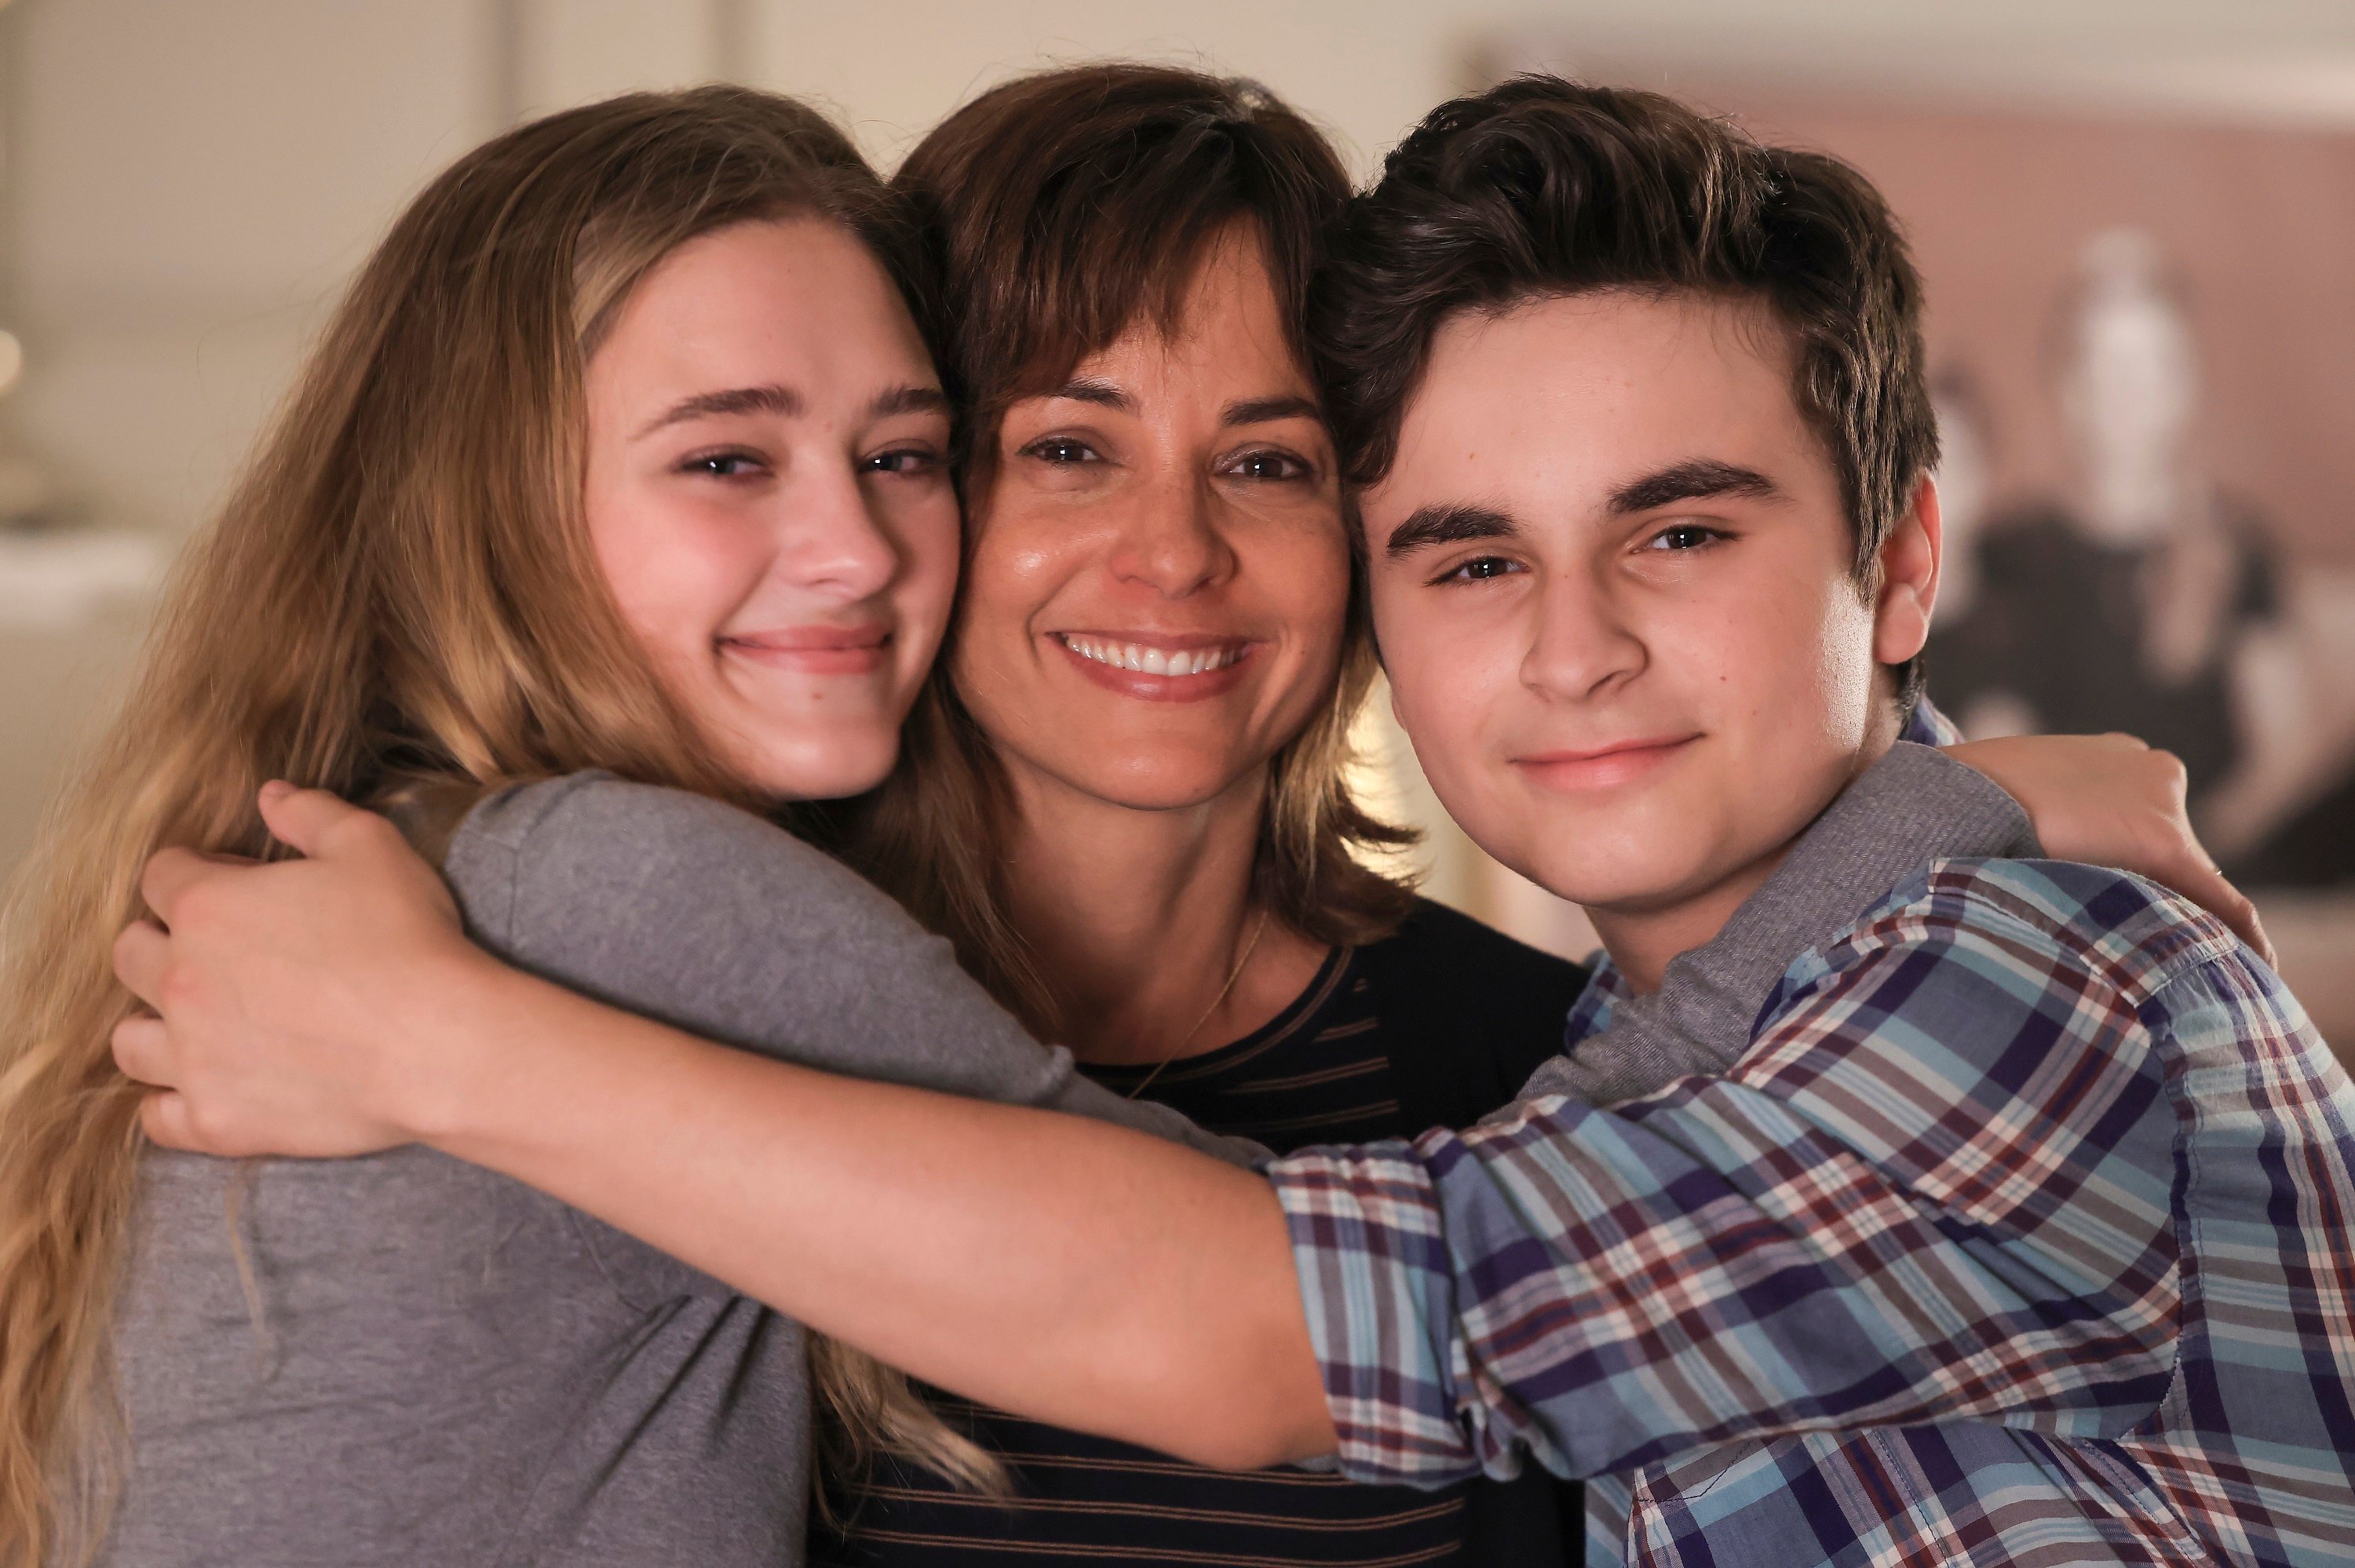 A Million Little Things Sophie, Delilah and Danny hugging, played by Lizzy Greene, Stephanie Szostak, and Chance Hurstfield